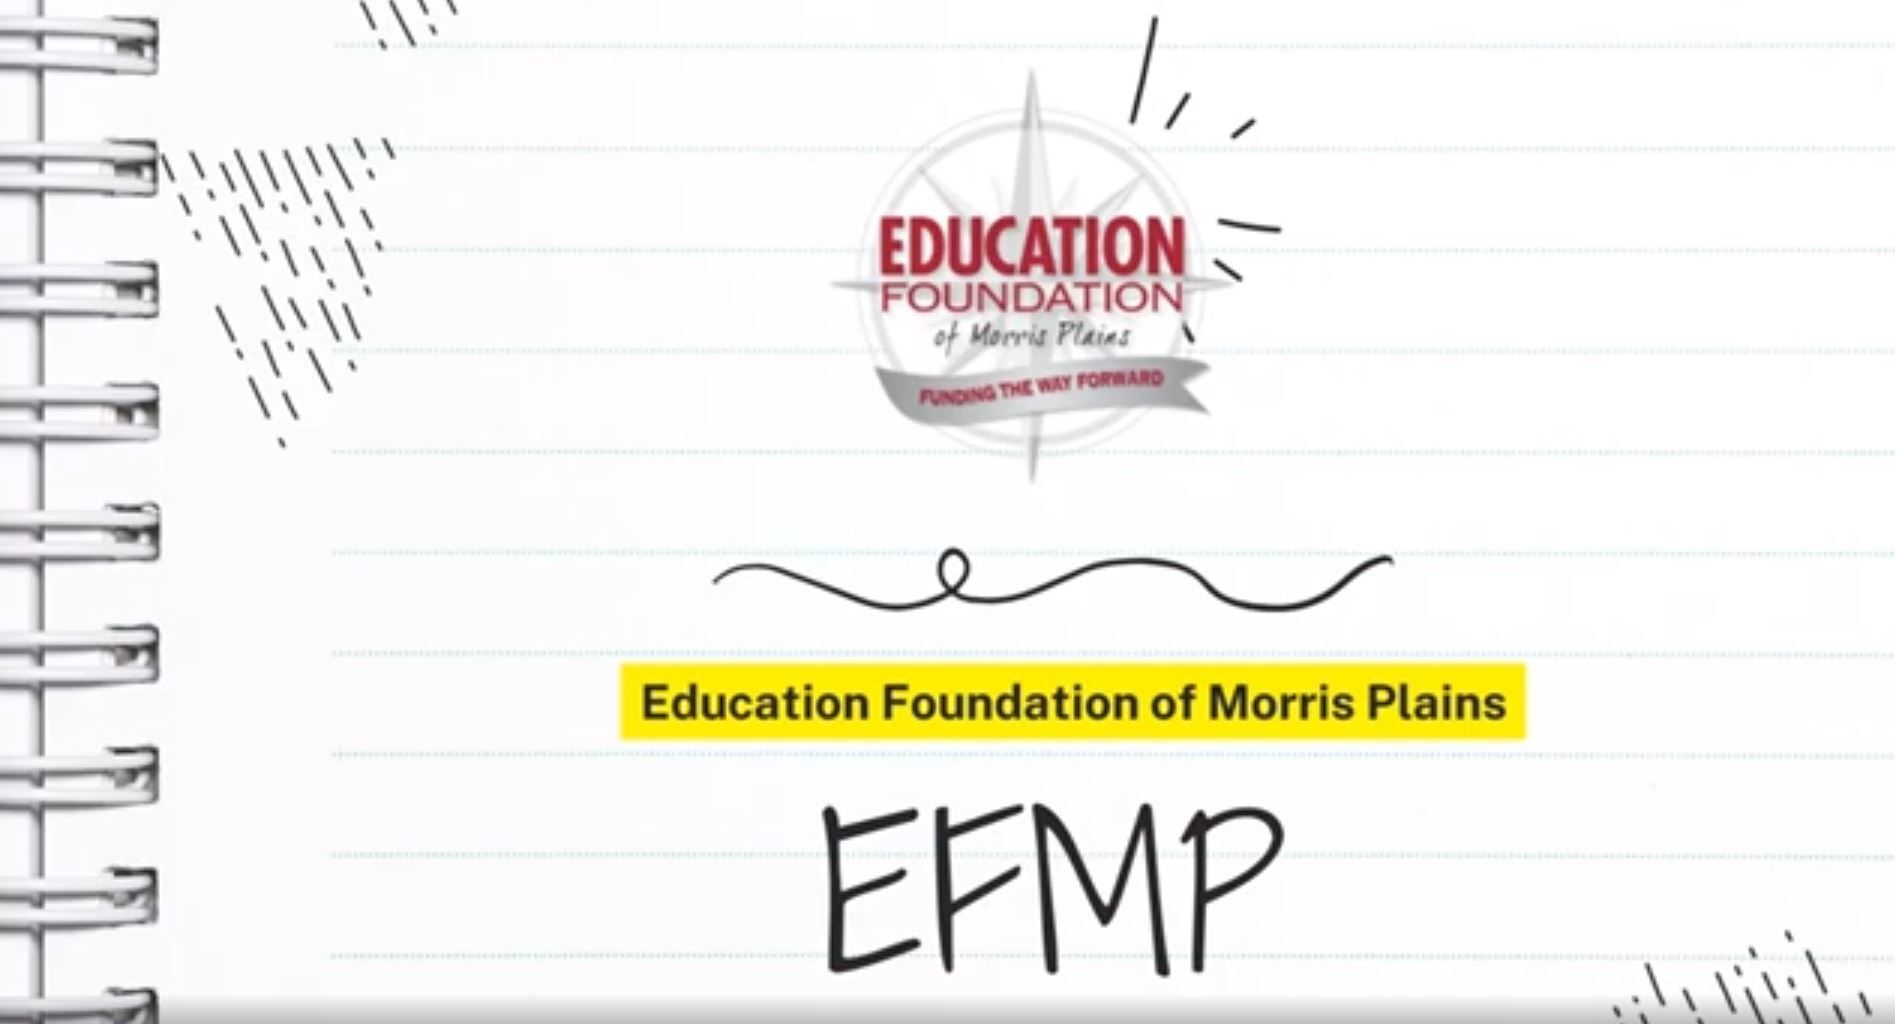 How does the EFMP support innovation the Morris Plains School District?